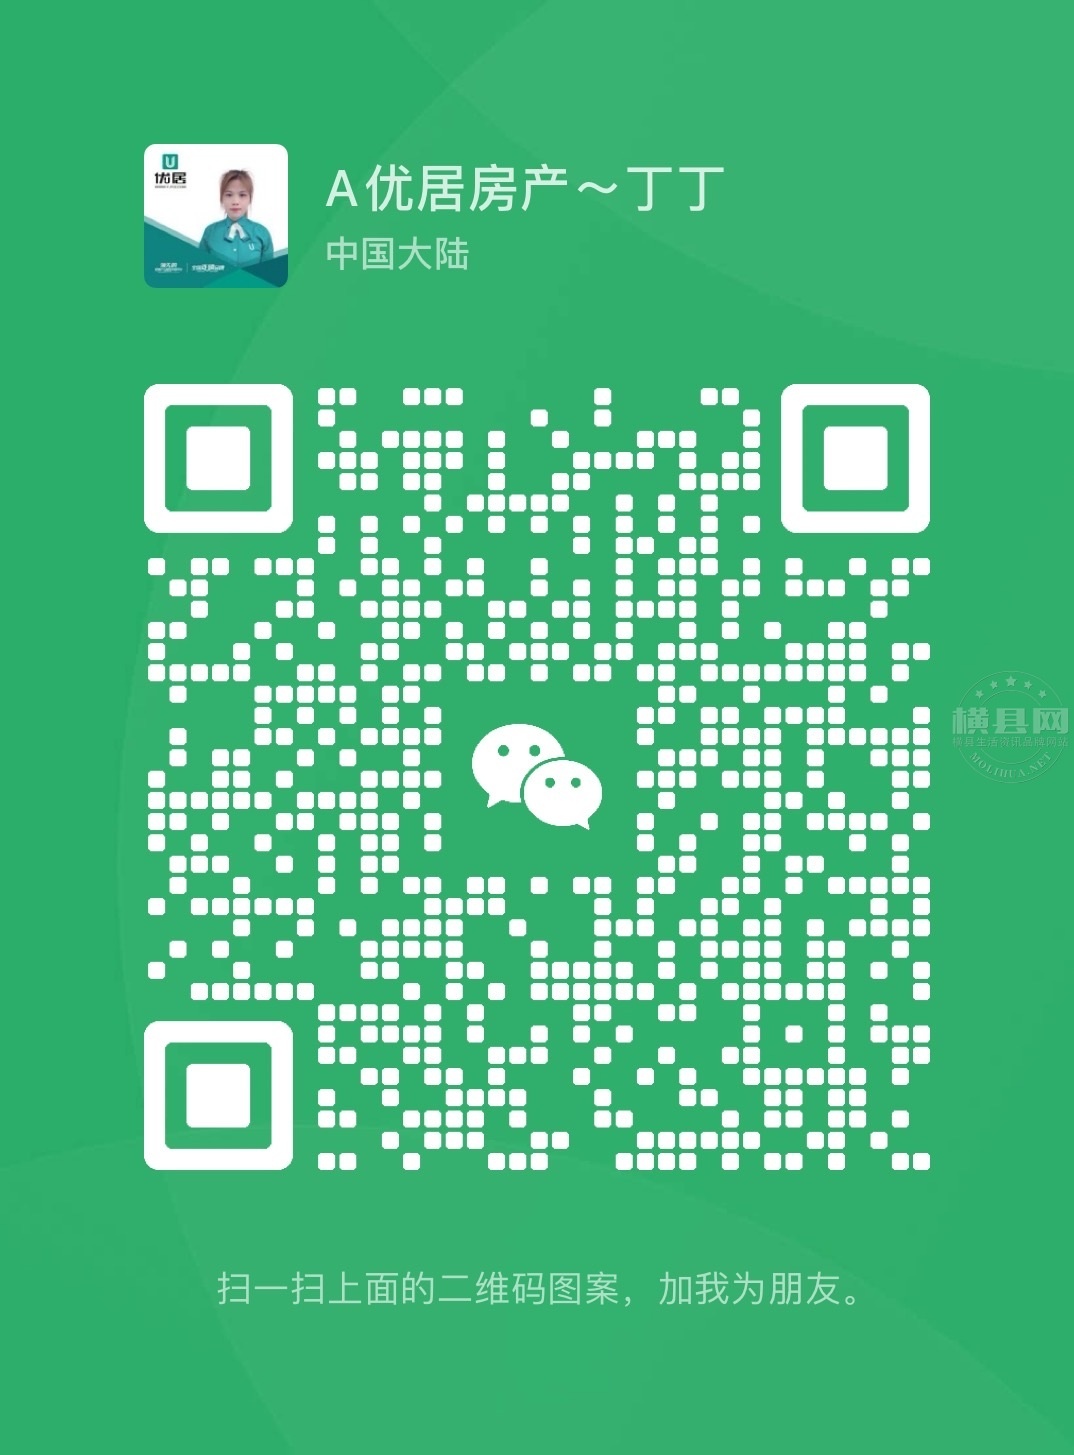 wechat_upload17148145356635fe473a909